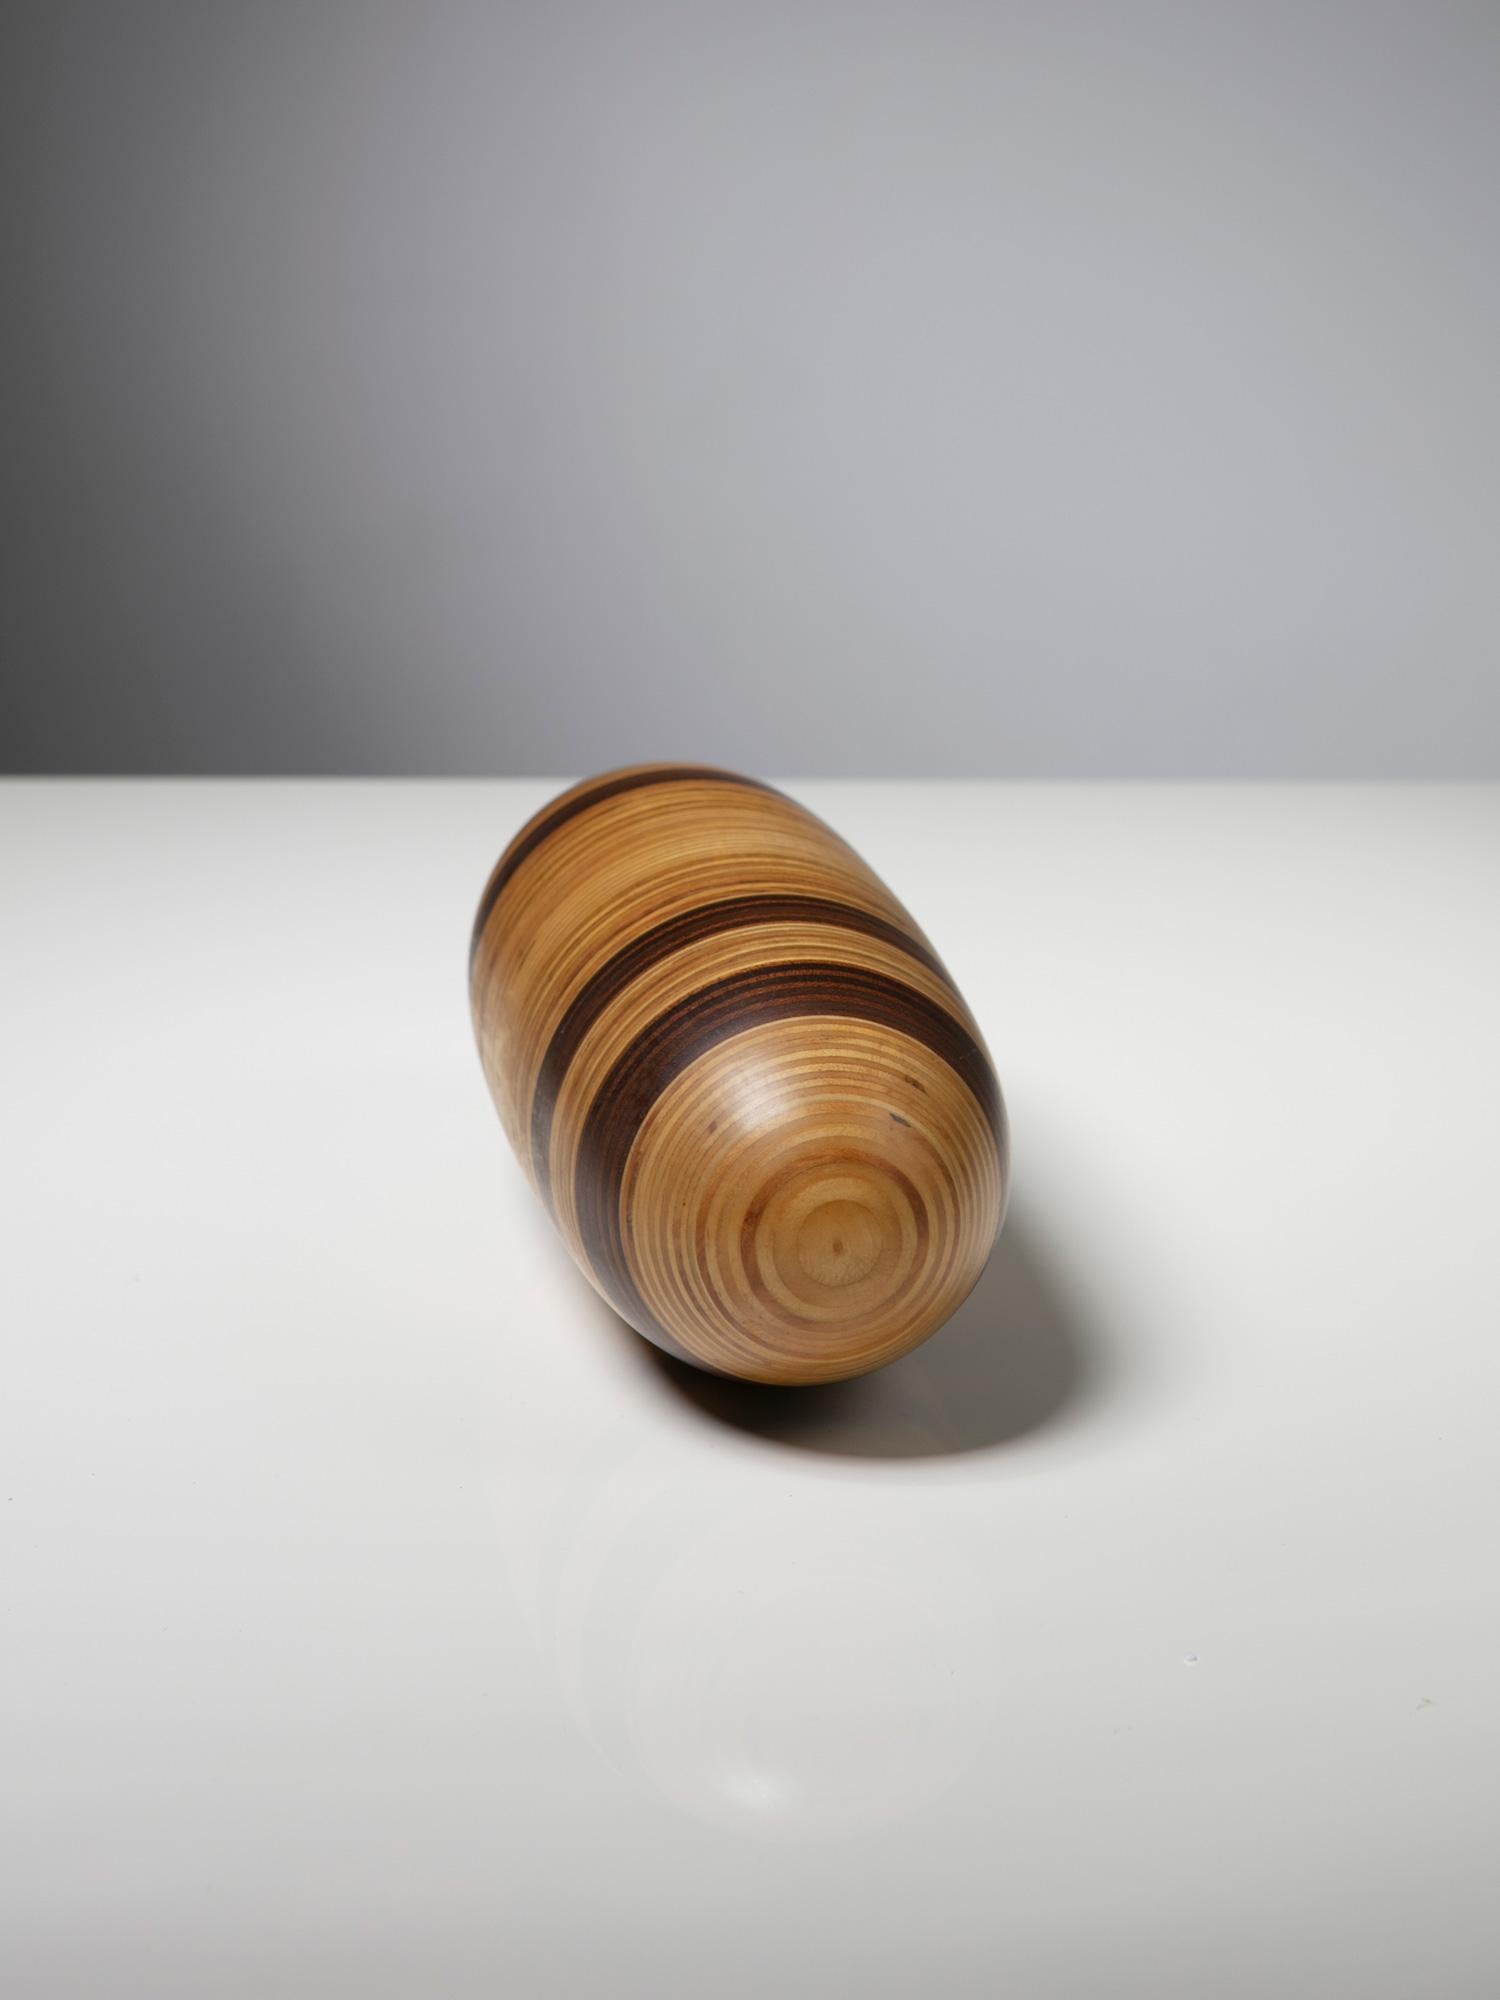 Wood sculpture by Pino Pedano for Pedano.
Limited numbered edition piece, this is specimen n. 13/31.
 